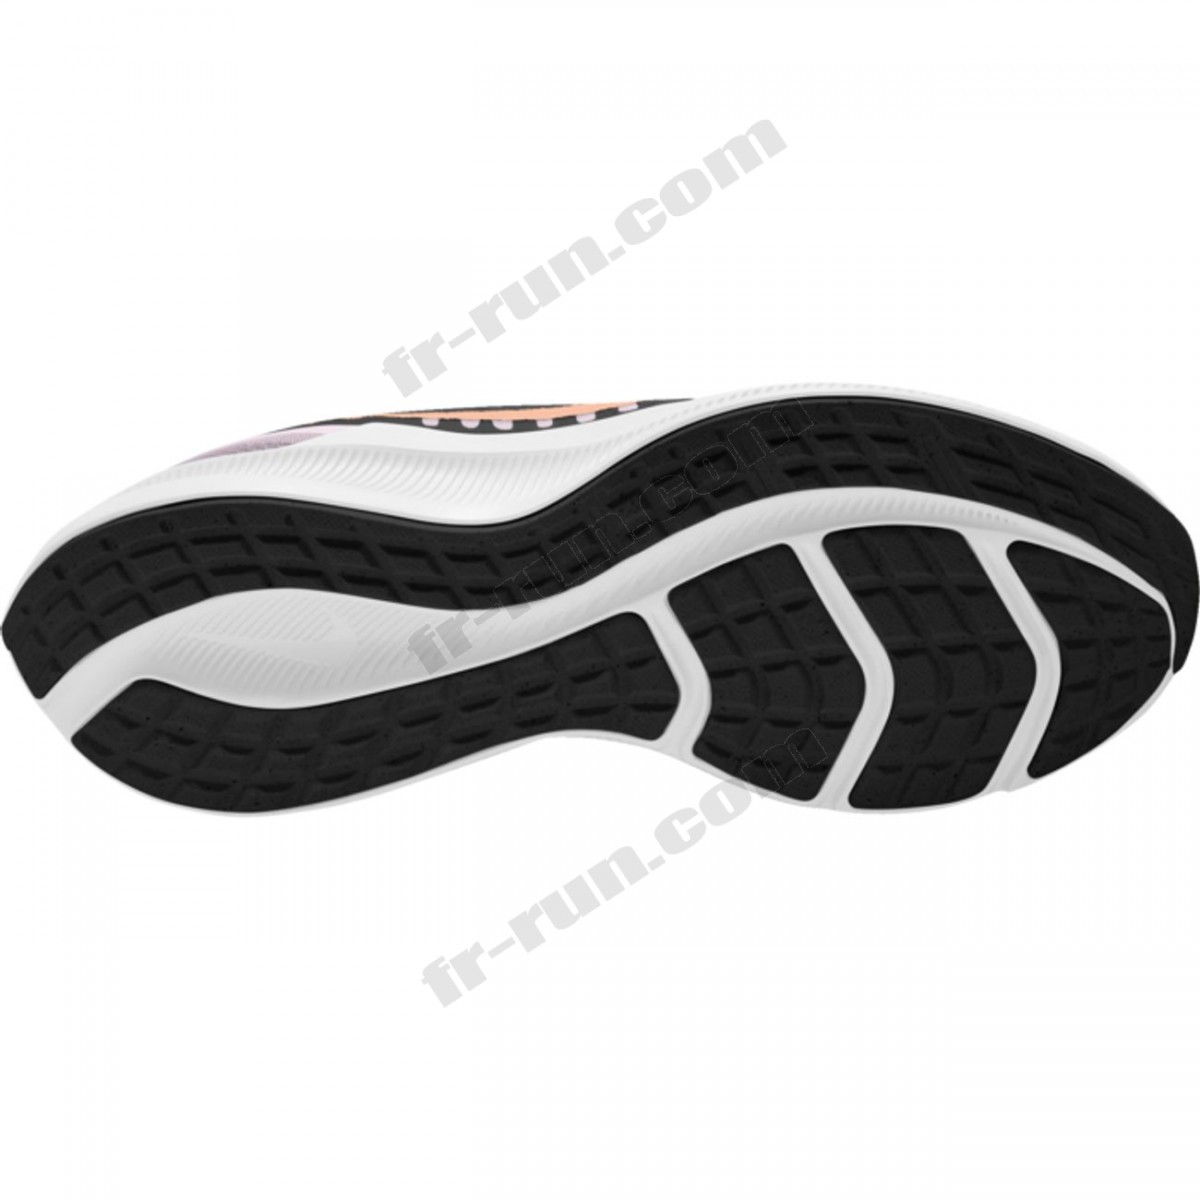 Nike/CHAUSSURES BASSES running femme NIKE NIKE DOWNSHIFTER 10 W √ Nouveau style √ Soldes - -1